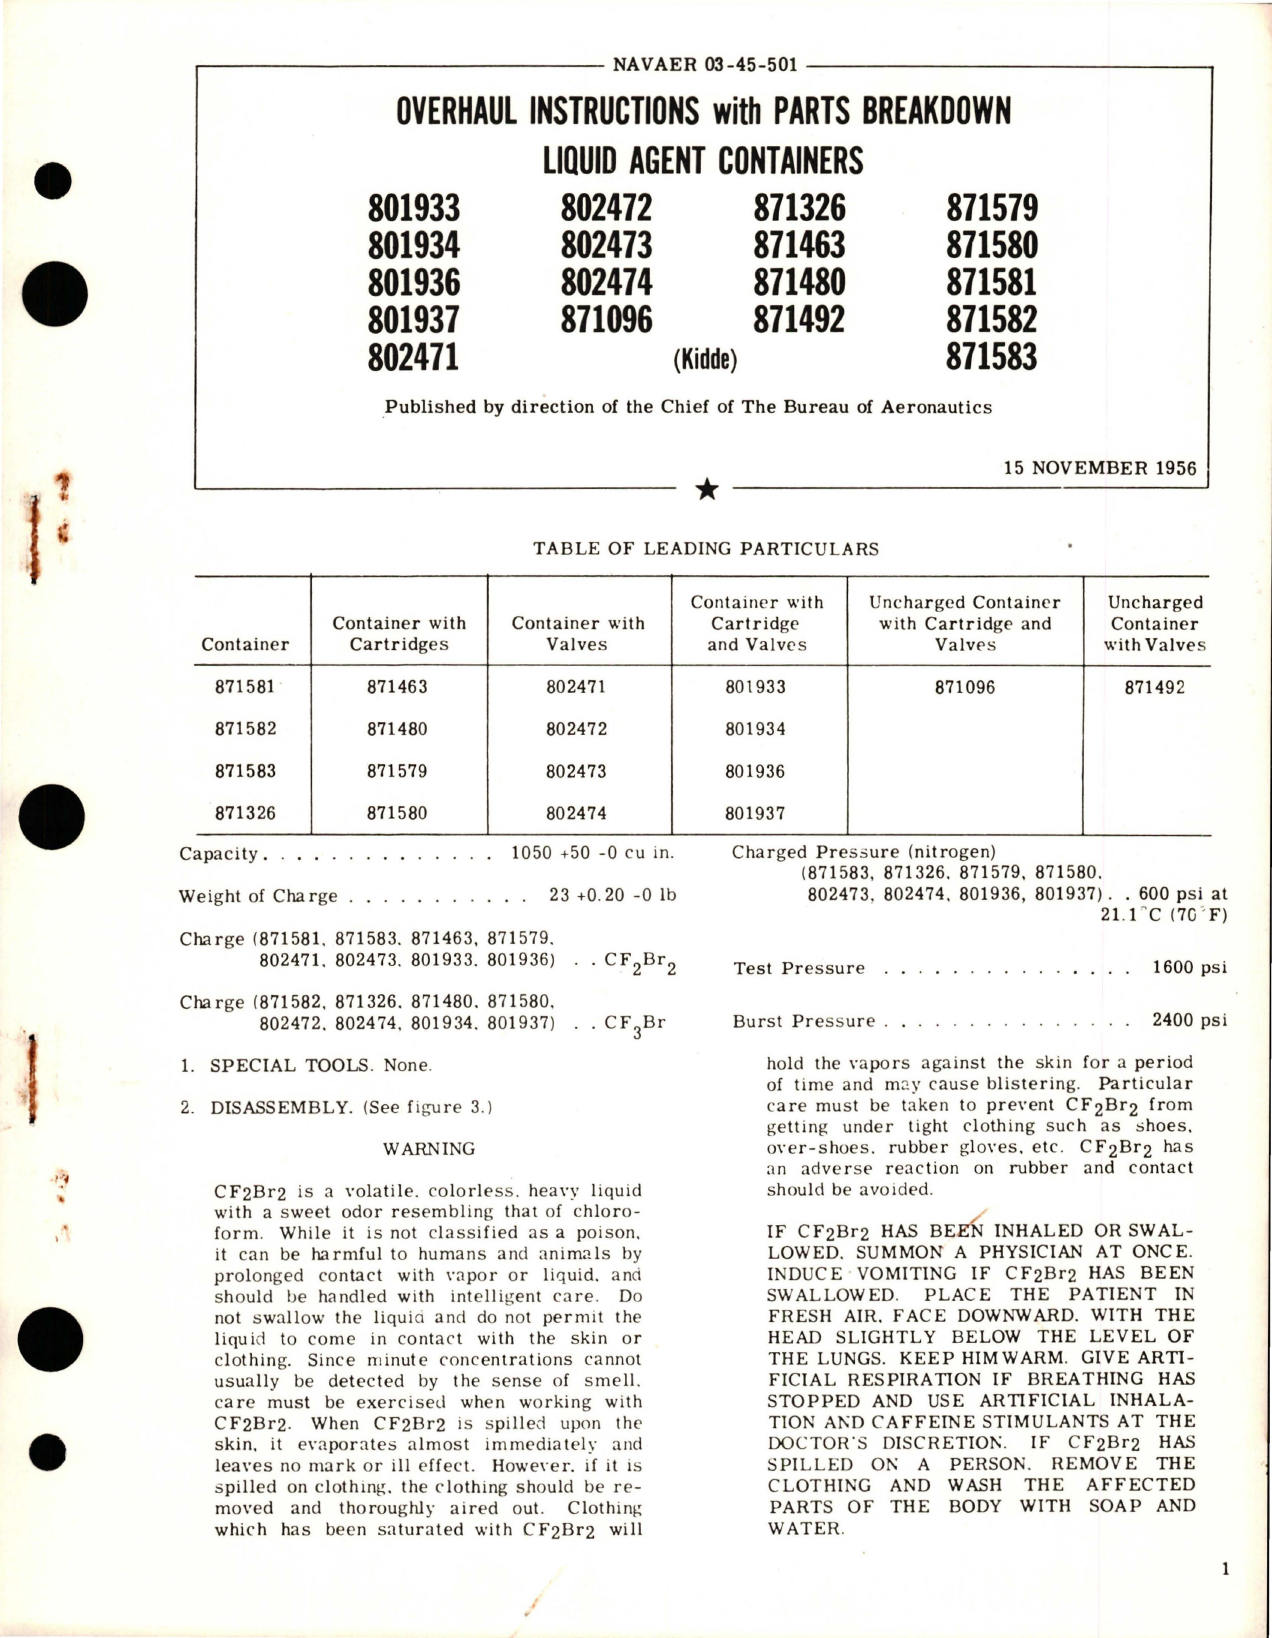 Sample page 1 from AirCorps Library document: Overhaul Instructions with Parts Breakdown for Liquid Agent Containers